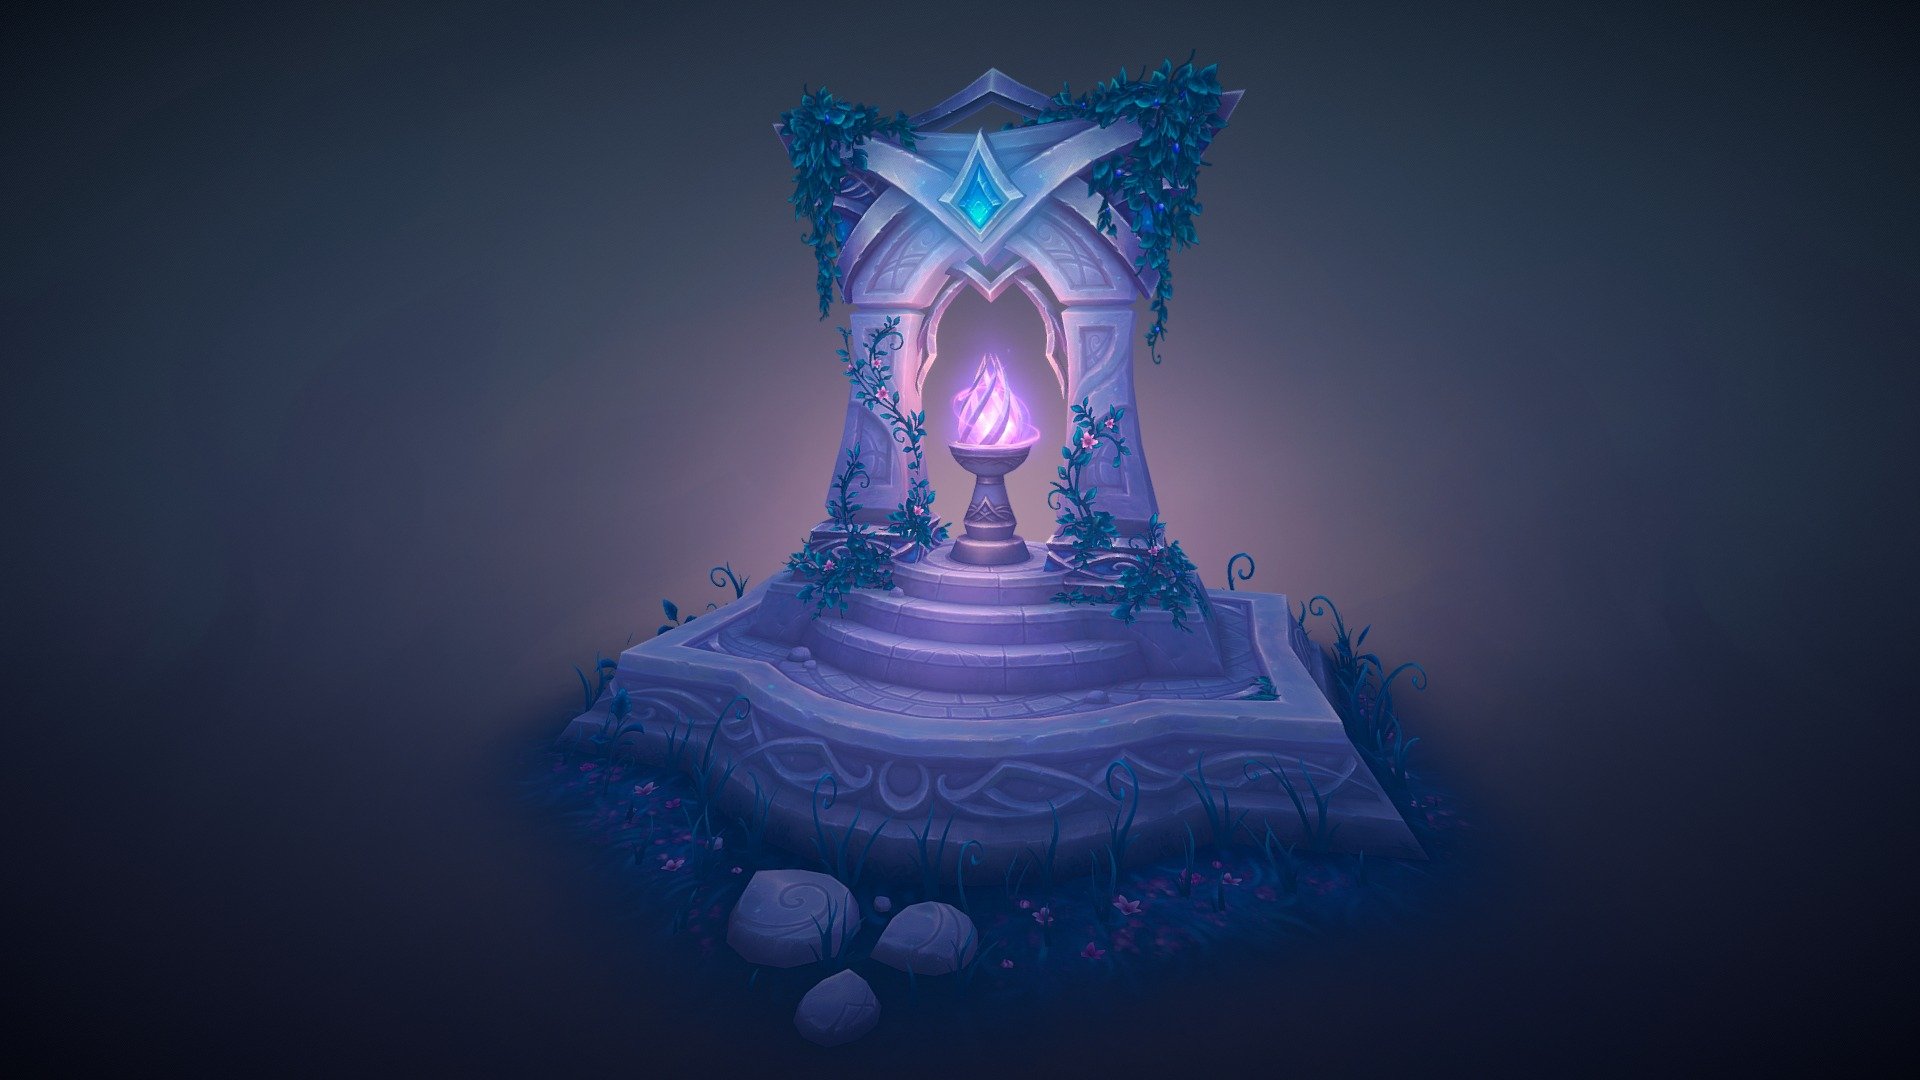 These last couple of months I’ve been doing the Brushforge “Aeon Core” mentorship with the all amazing Jordan Powers.
Suramar is hands-down my favourite location in WoW, so it was even more exciting to find out this was a zone that Jordan worked on too!
Thank you so much for everything you’ve taught me, Jordan, and most especially for all the nitpicking!! :D - Suramar Shrine - 3D model by Jessica Murphy (@jess.m) 3d model